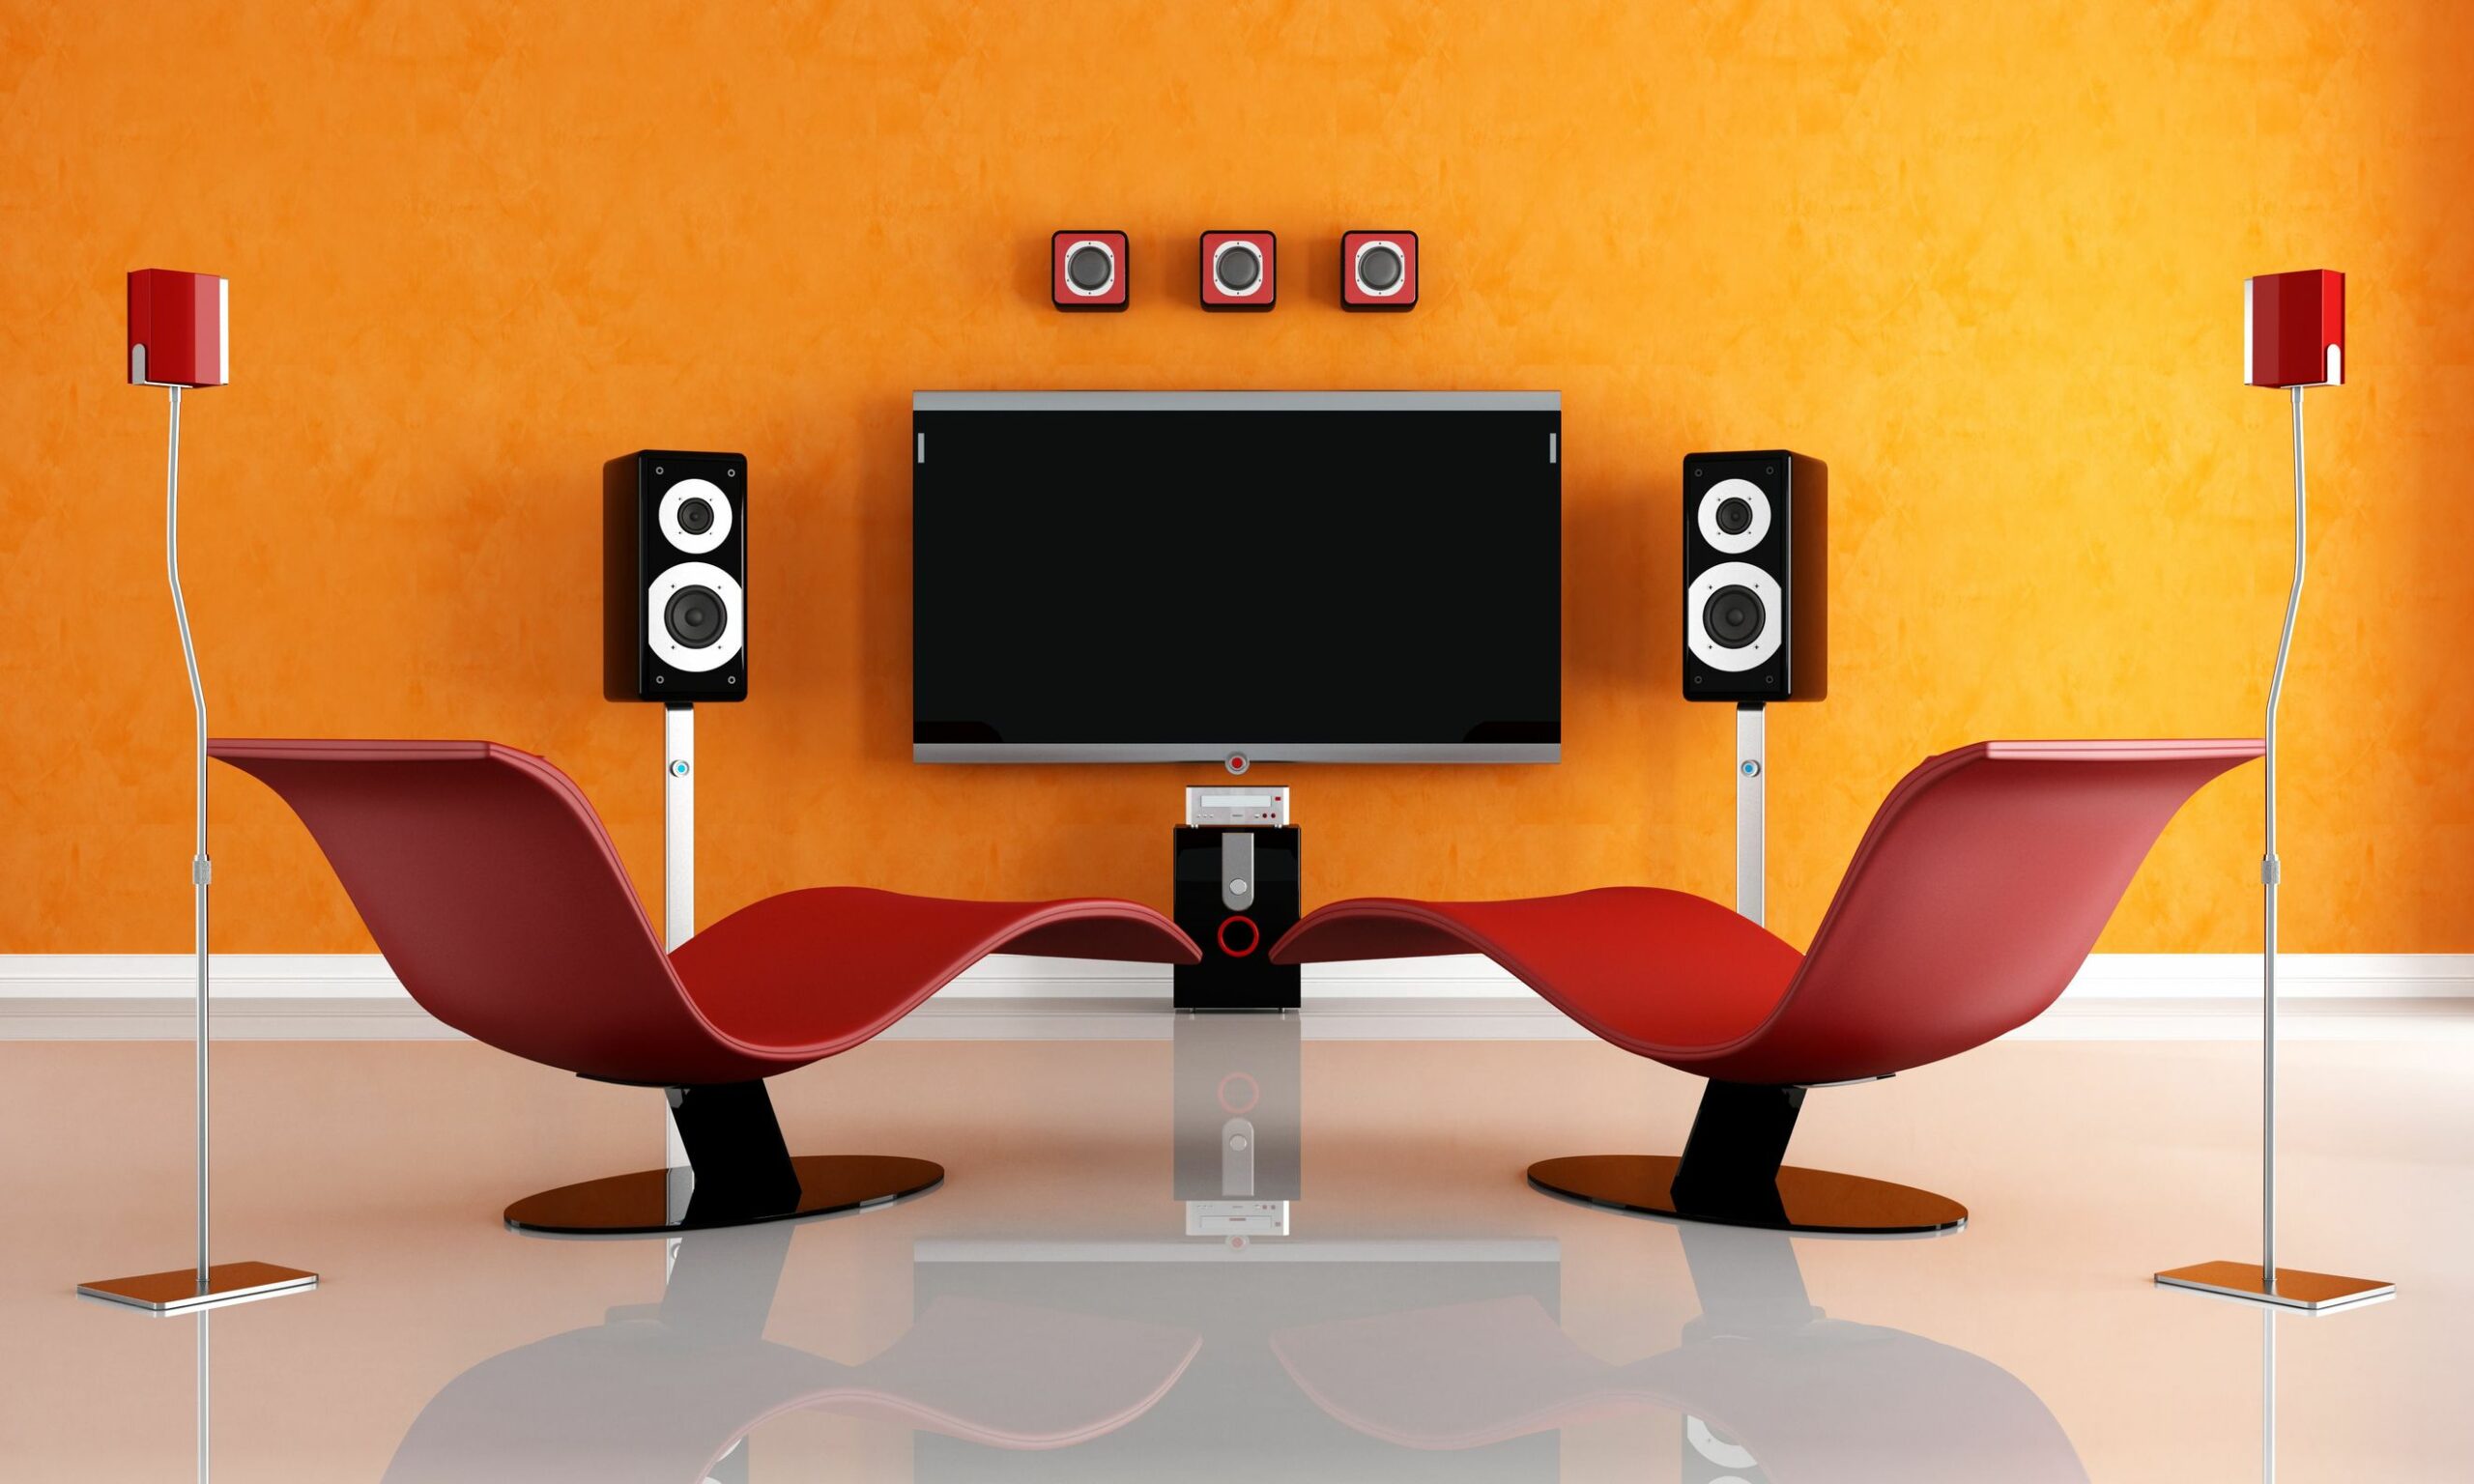 For Theater-Quality Audio, You Have To Position Your Speakers Properly